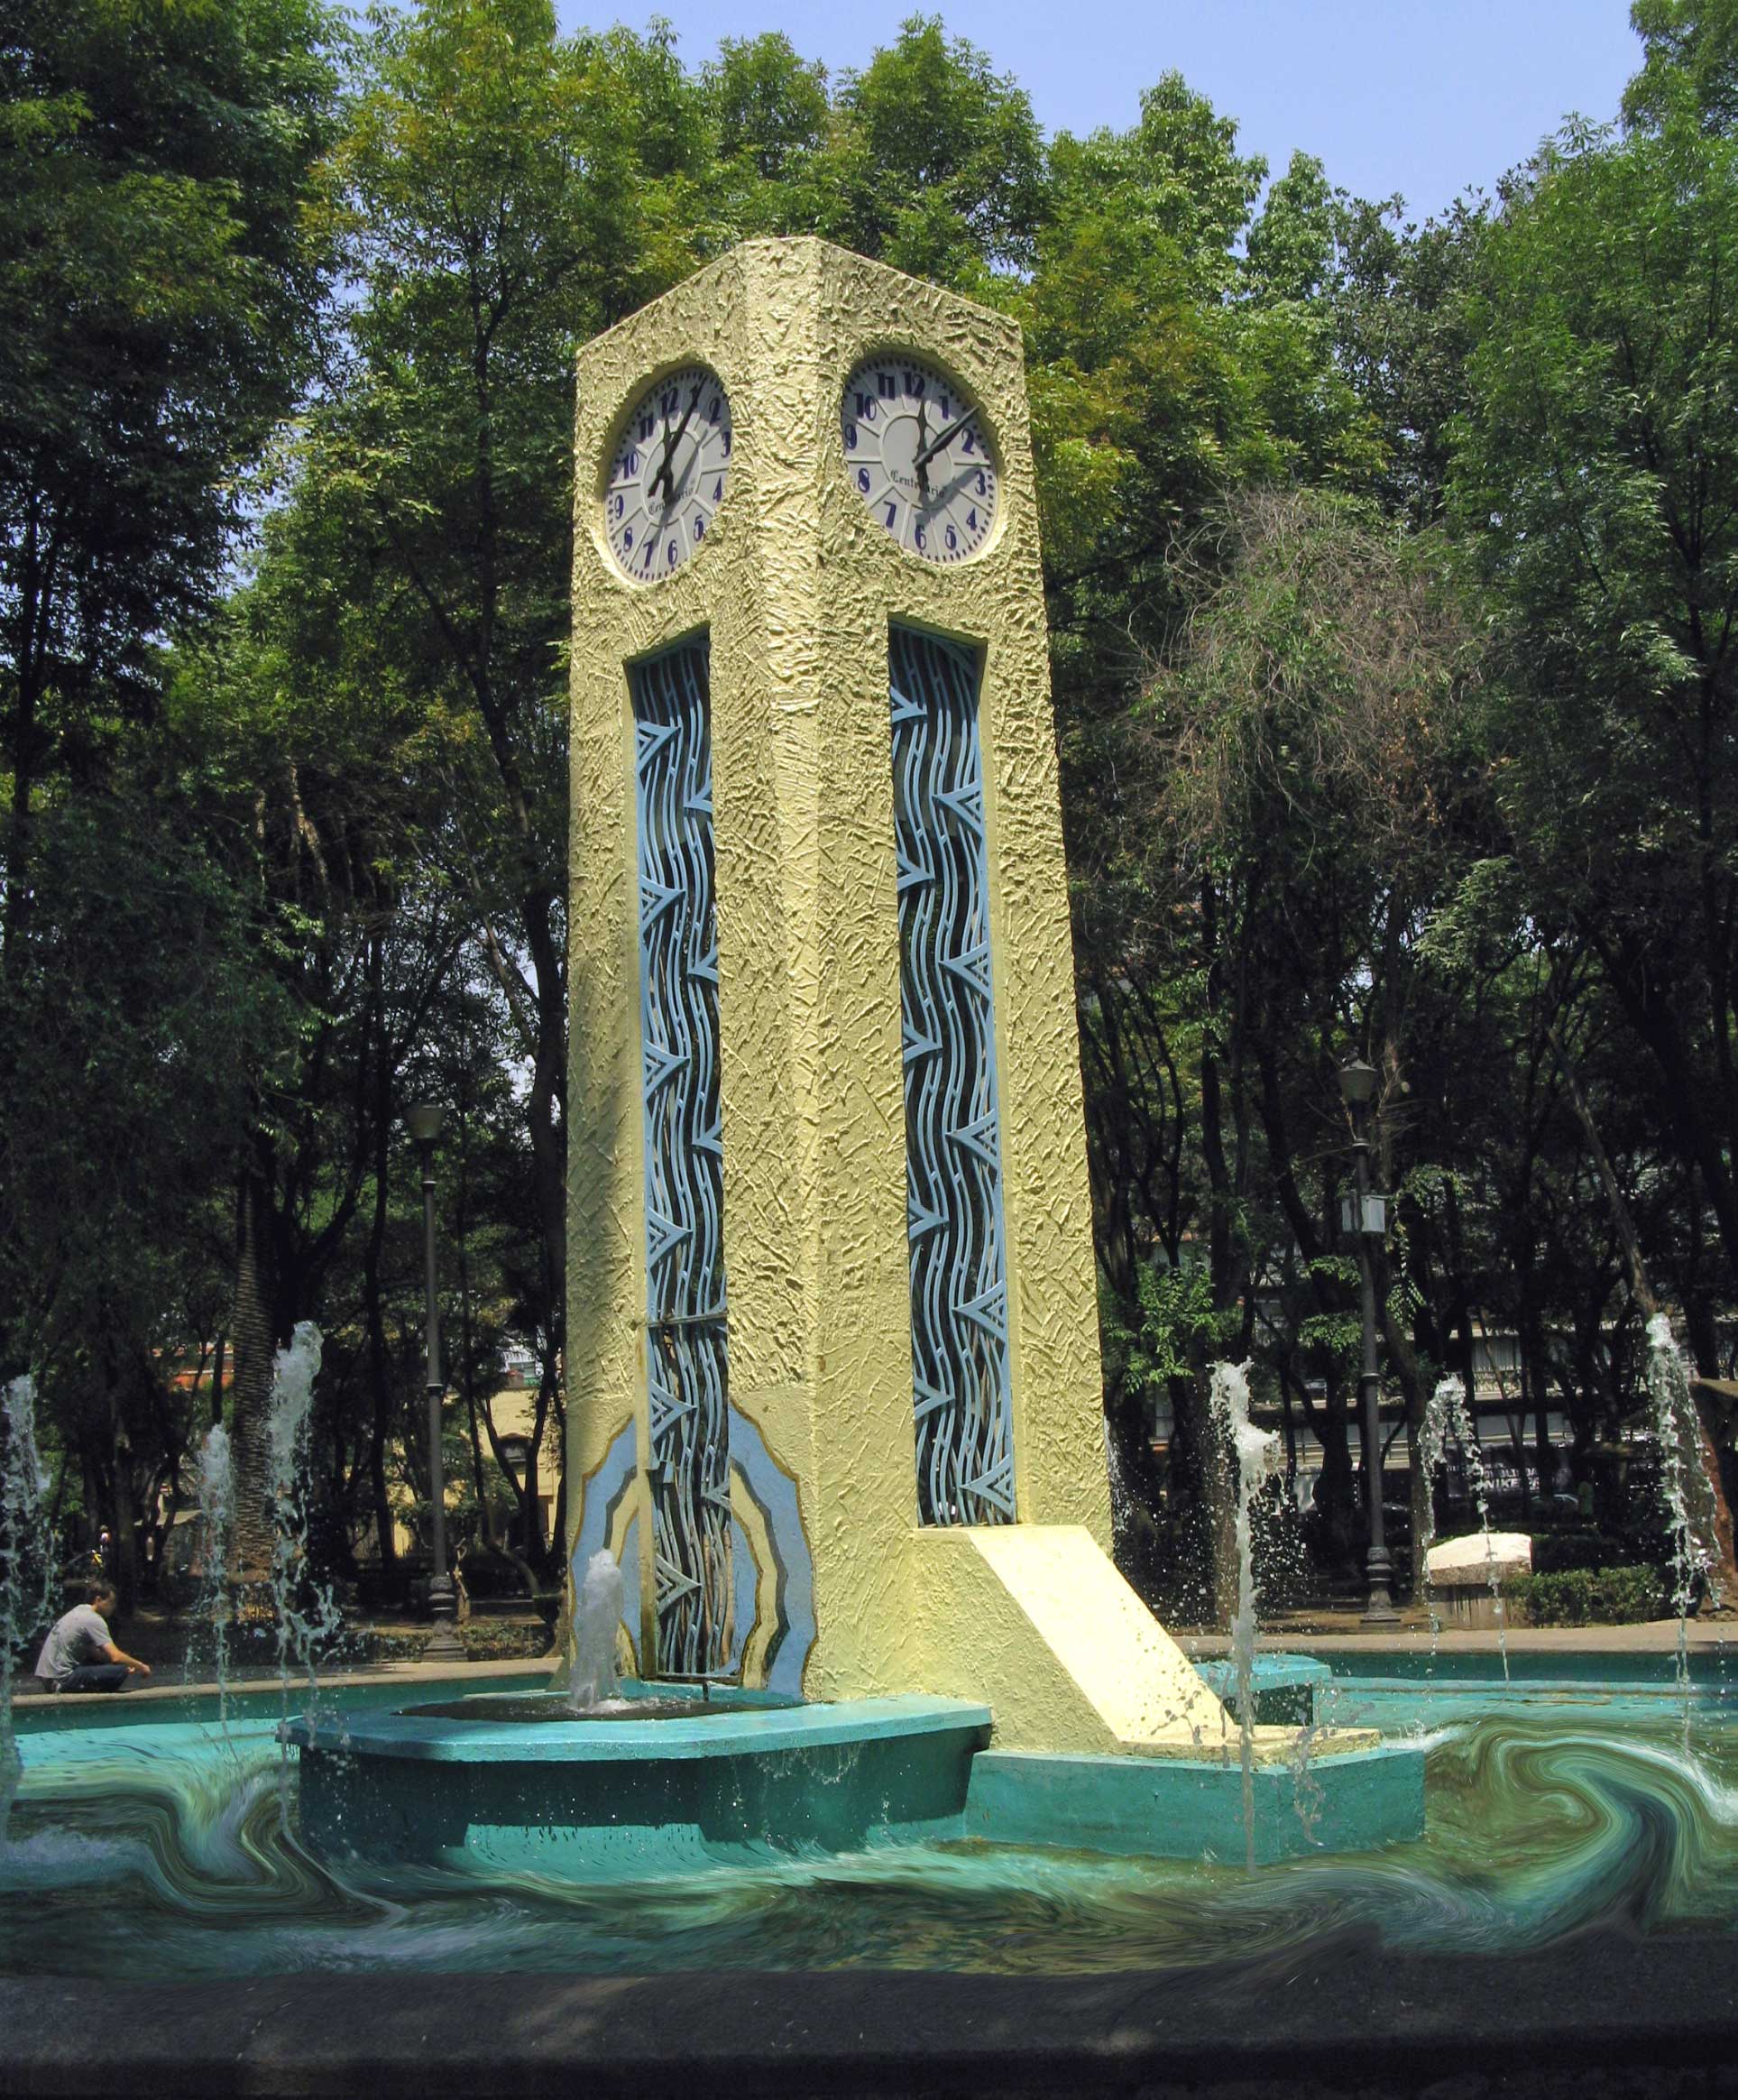 The Water Clock, donated to Mxico, DF by the Armenian Community. Parque Mexico, Colonia Condesa